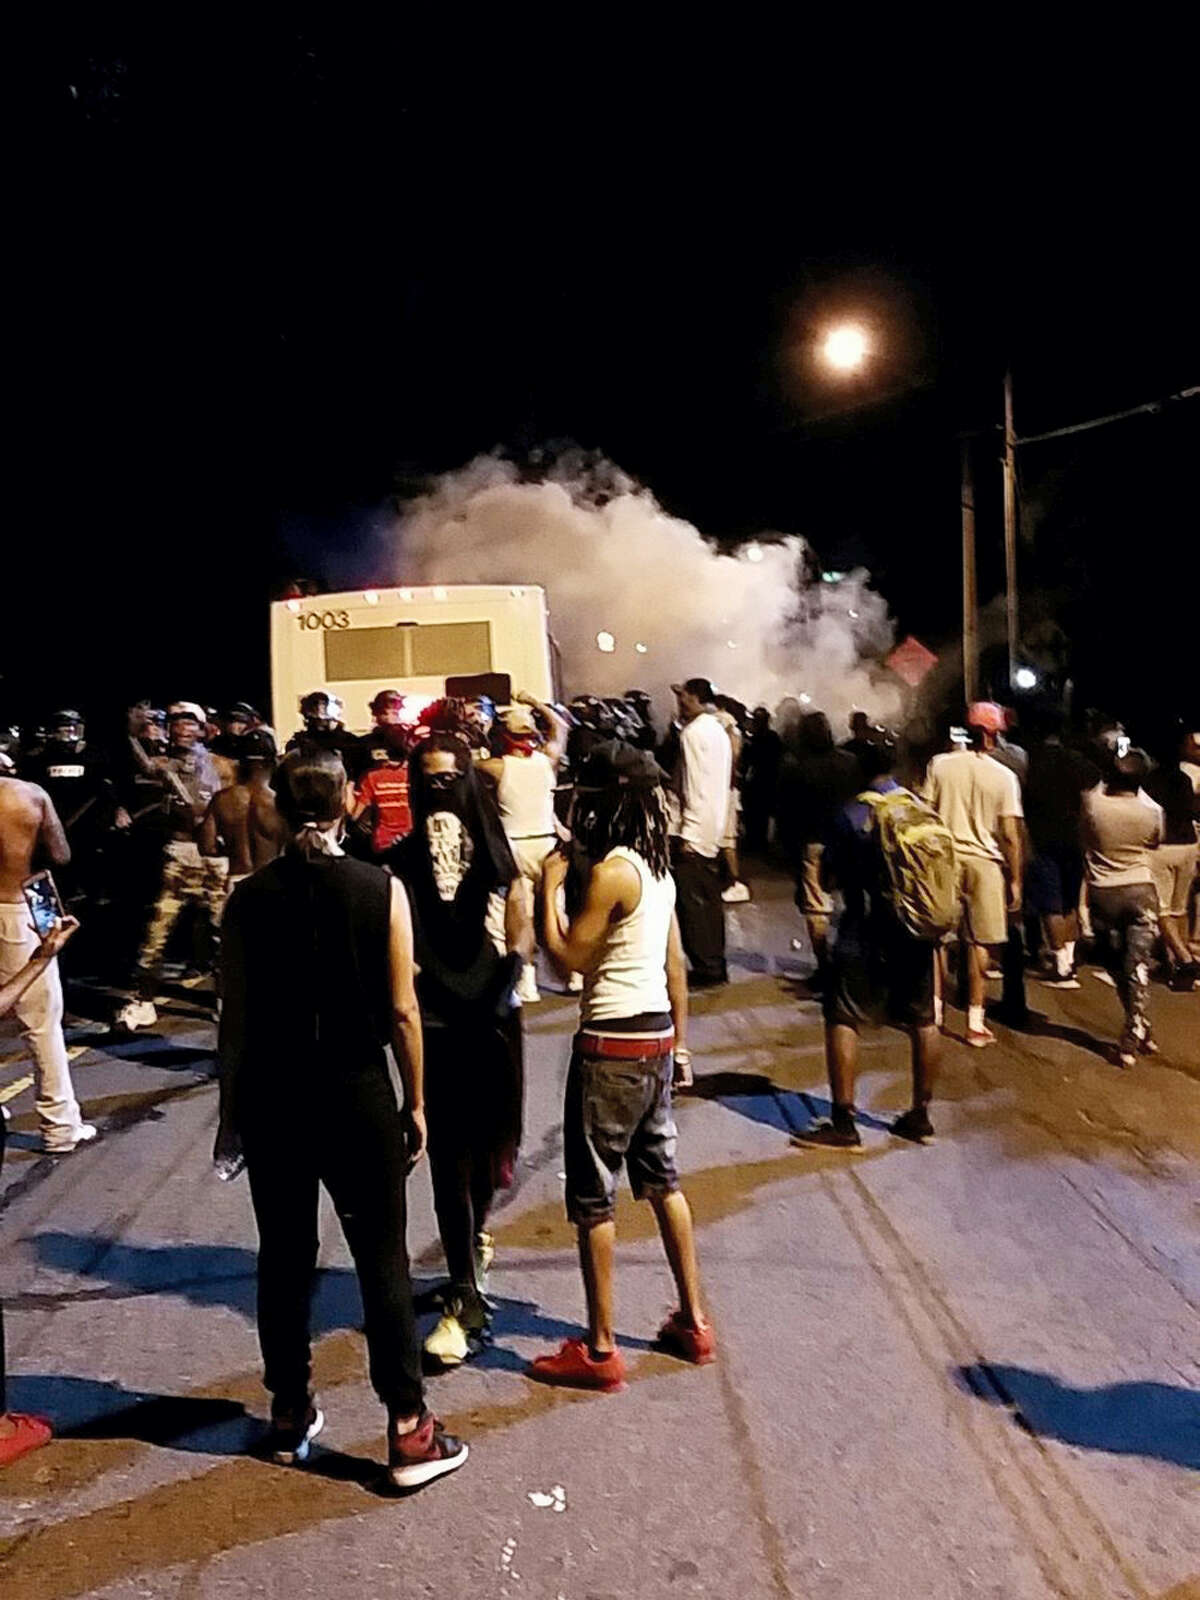 Police fire tear gas into the crowd of protesters on Old Concord Road late Tuesday night, Sept. 20, 2016, in Charlotte, N.C. A black police officer shot an armed black man at an apartment complex Tuesday, authorities said, prompting angry street protests late into the night. The Charlotte-Mecklenburg Police Department tweeted that demonstrators were destroying marked police vehicles and that approximately 12 officers had been injured, including one who was hit in the face with a rock. (Ely Portillo/The Charlotte Observer via AP)